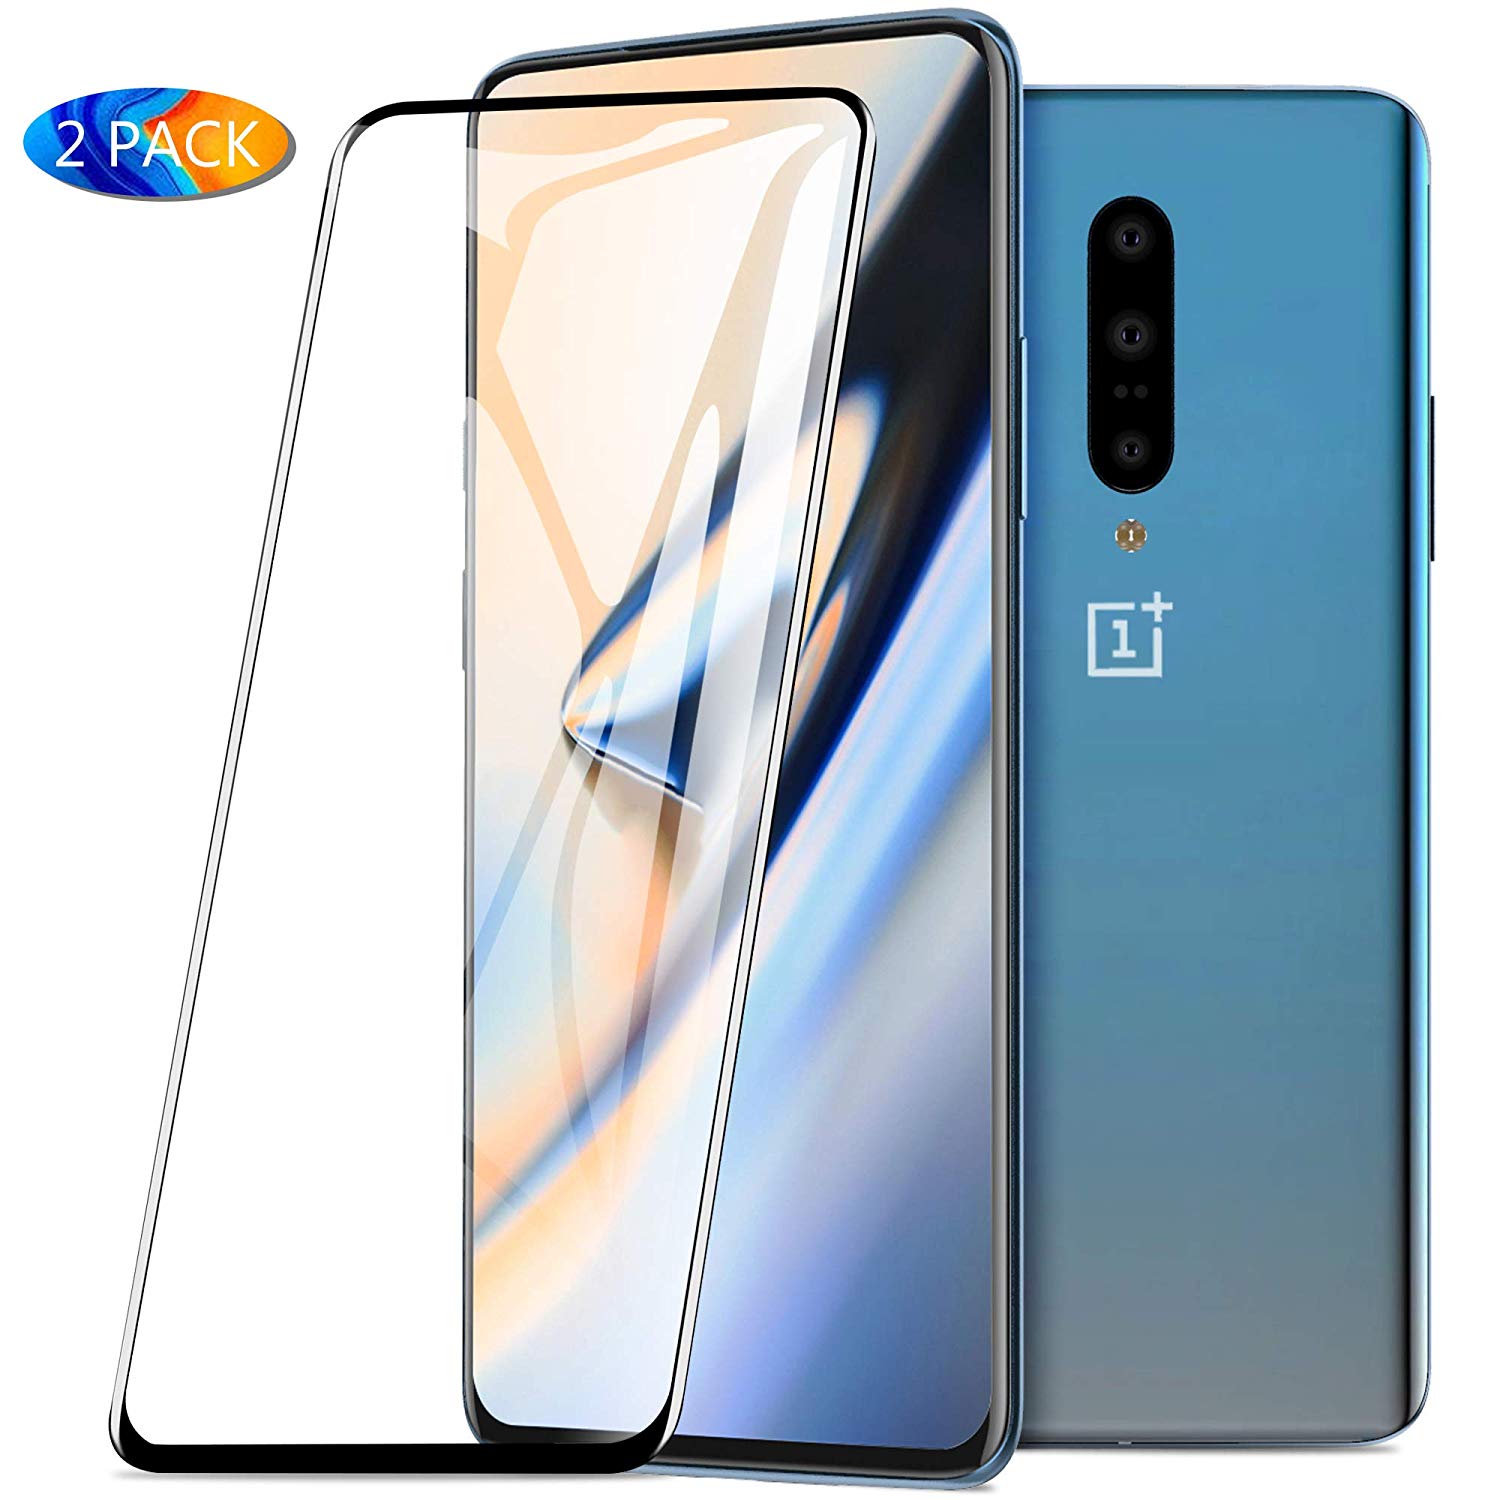 IVSO Screen Protector for OnePlus 7 Pro